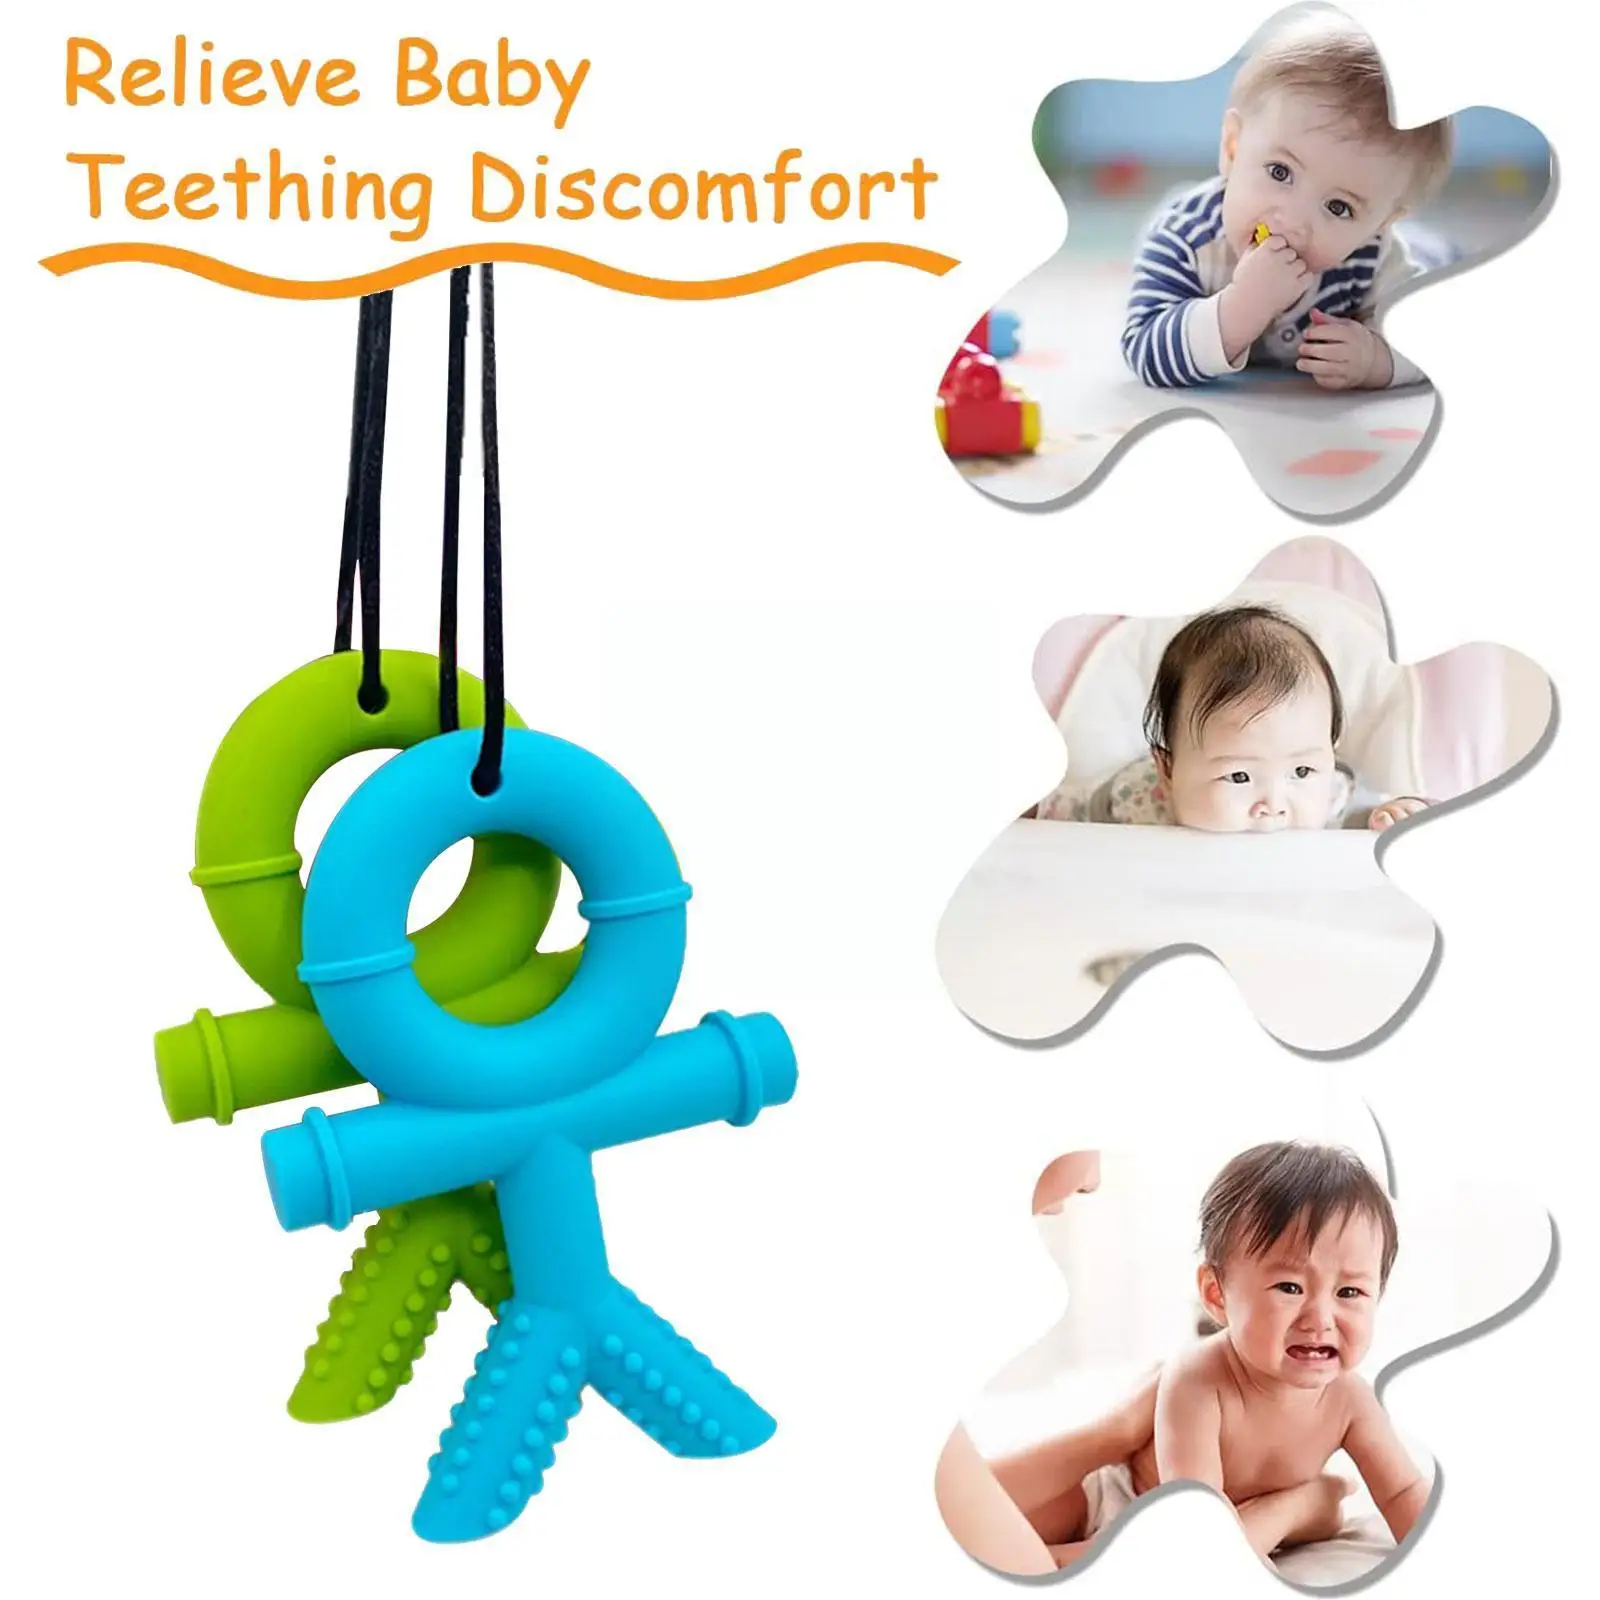 

Sensory Chew Teether Necklace Baby Silicone Teething Toys Soothing Pain Relief Teethers Toy For Babies Autism Anxiety Relie M2s7